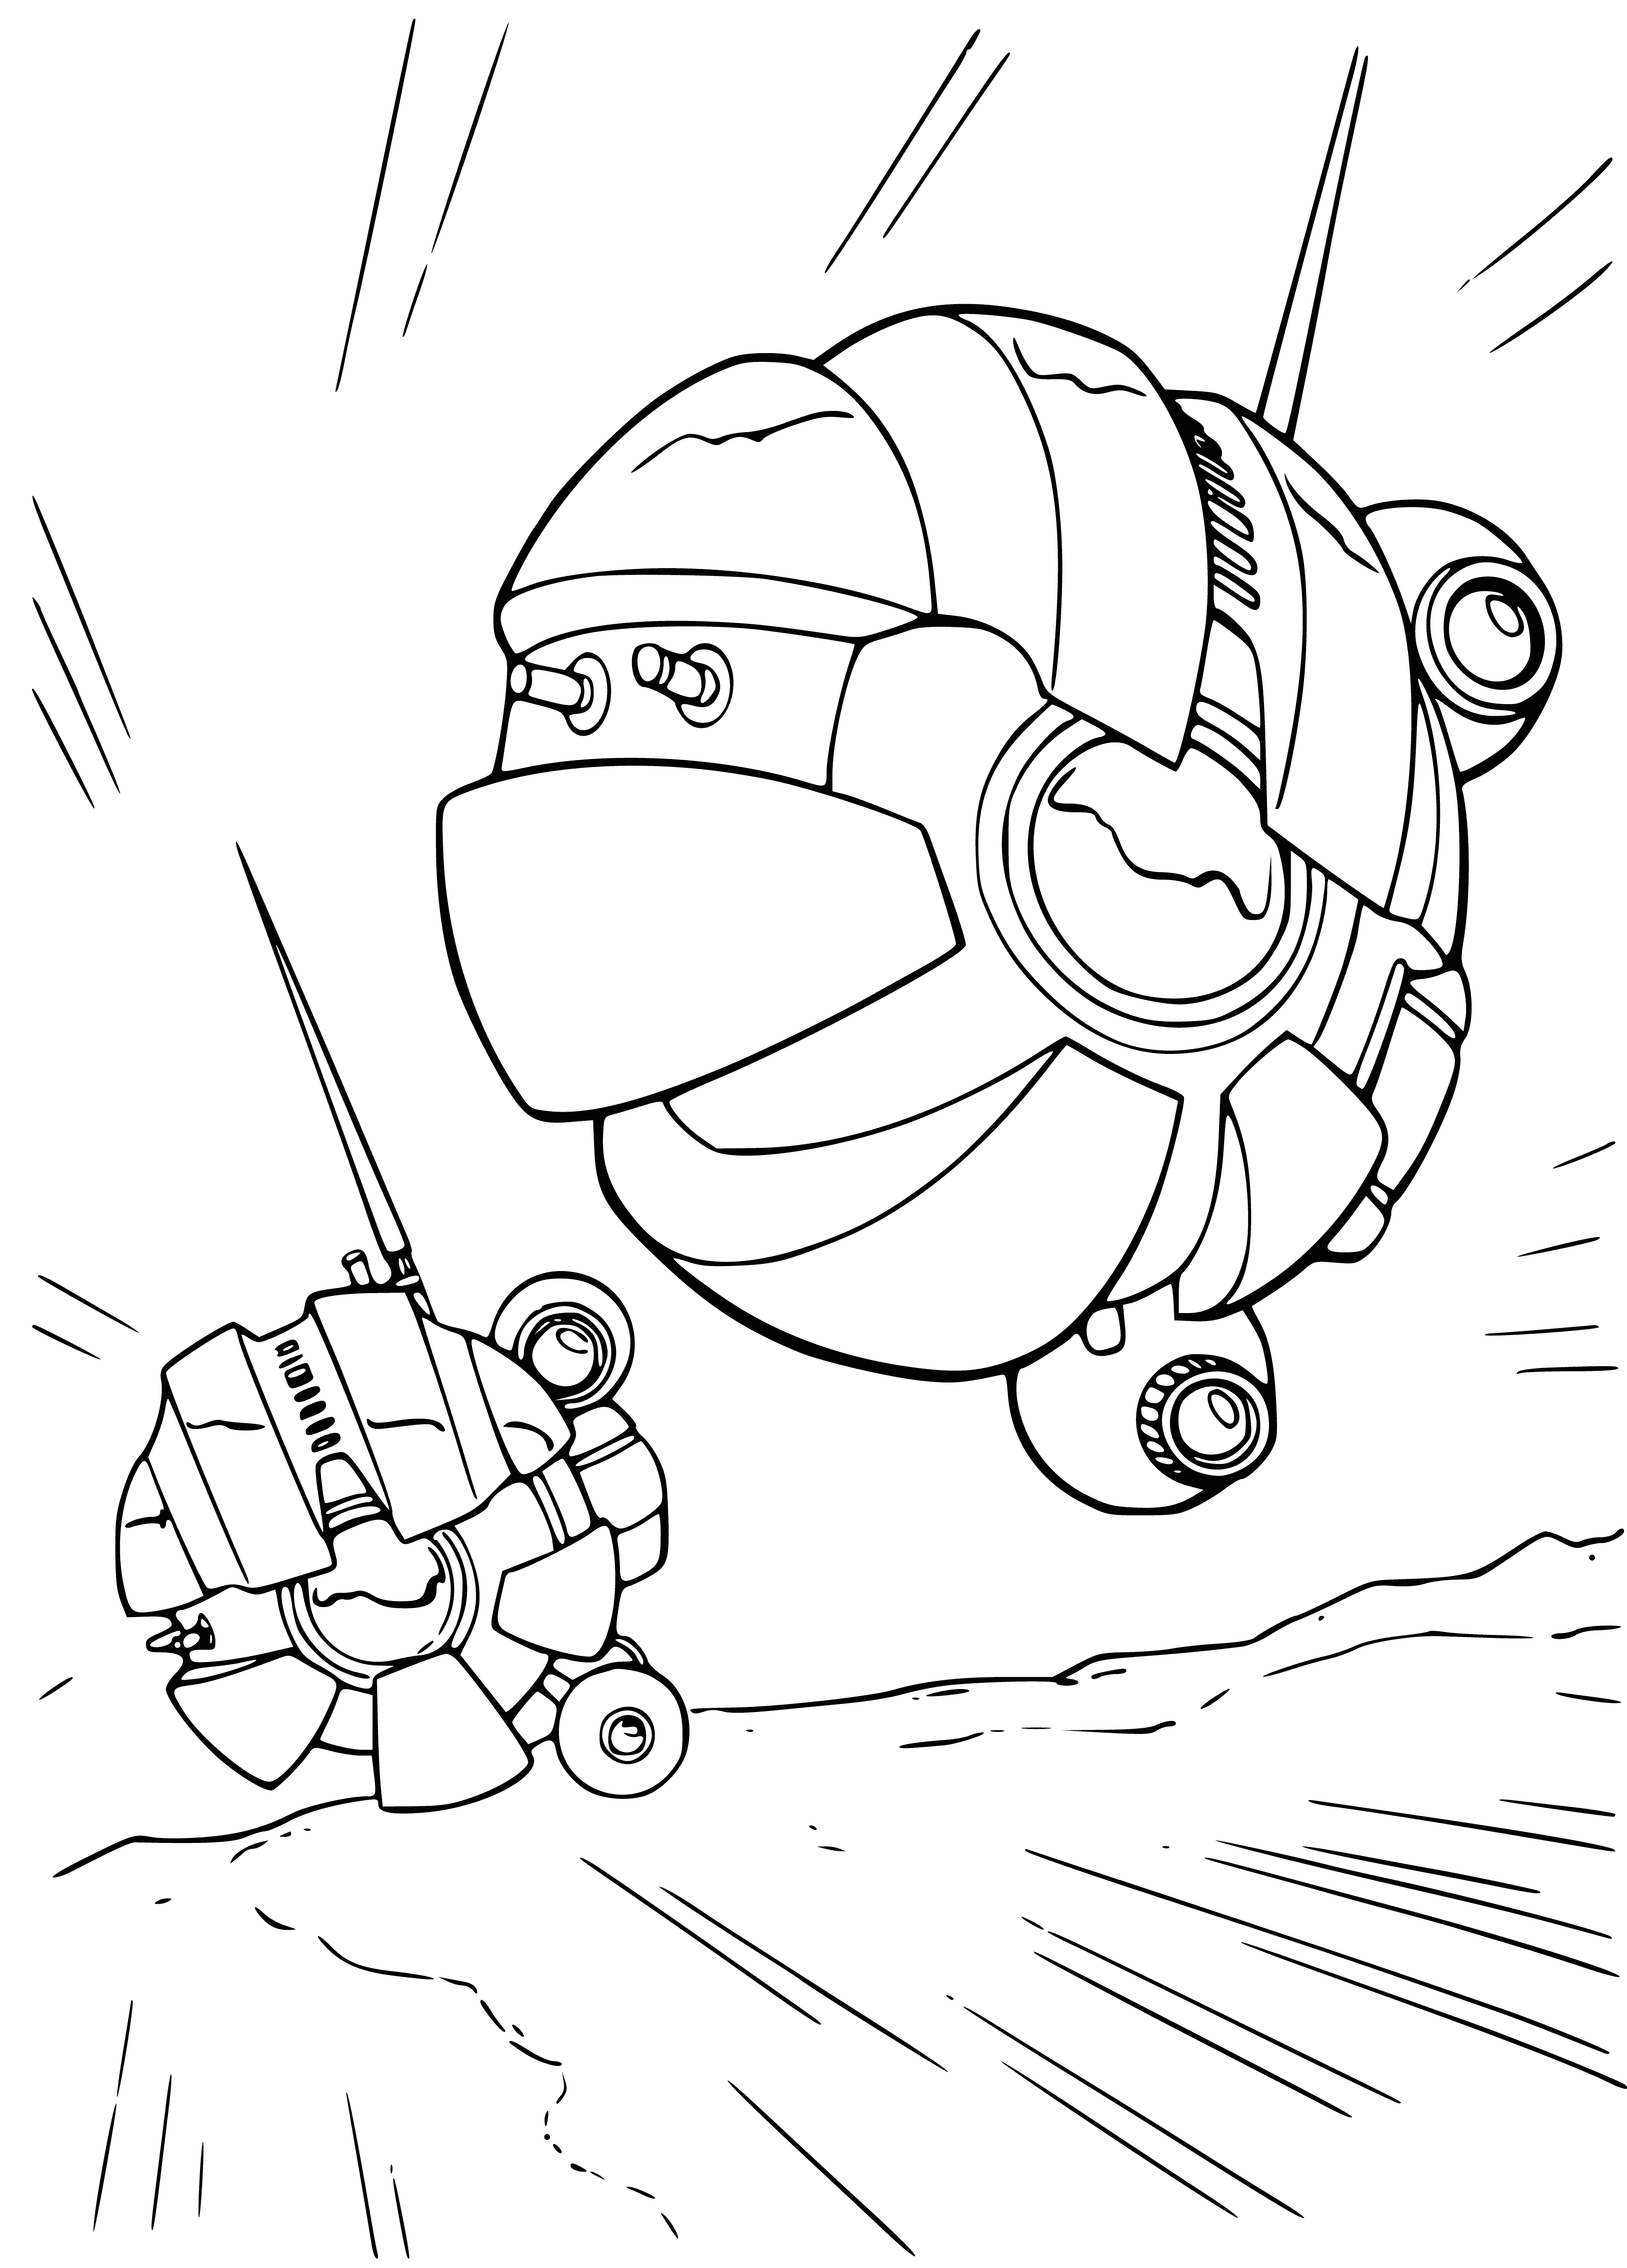 Sith scout droid coloring page